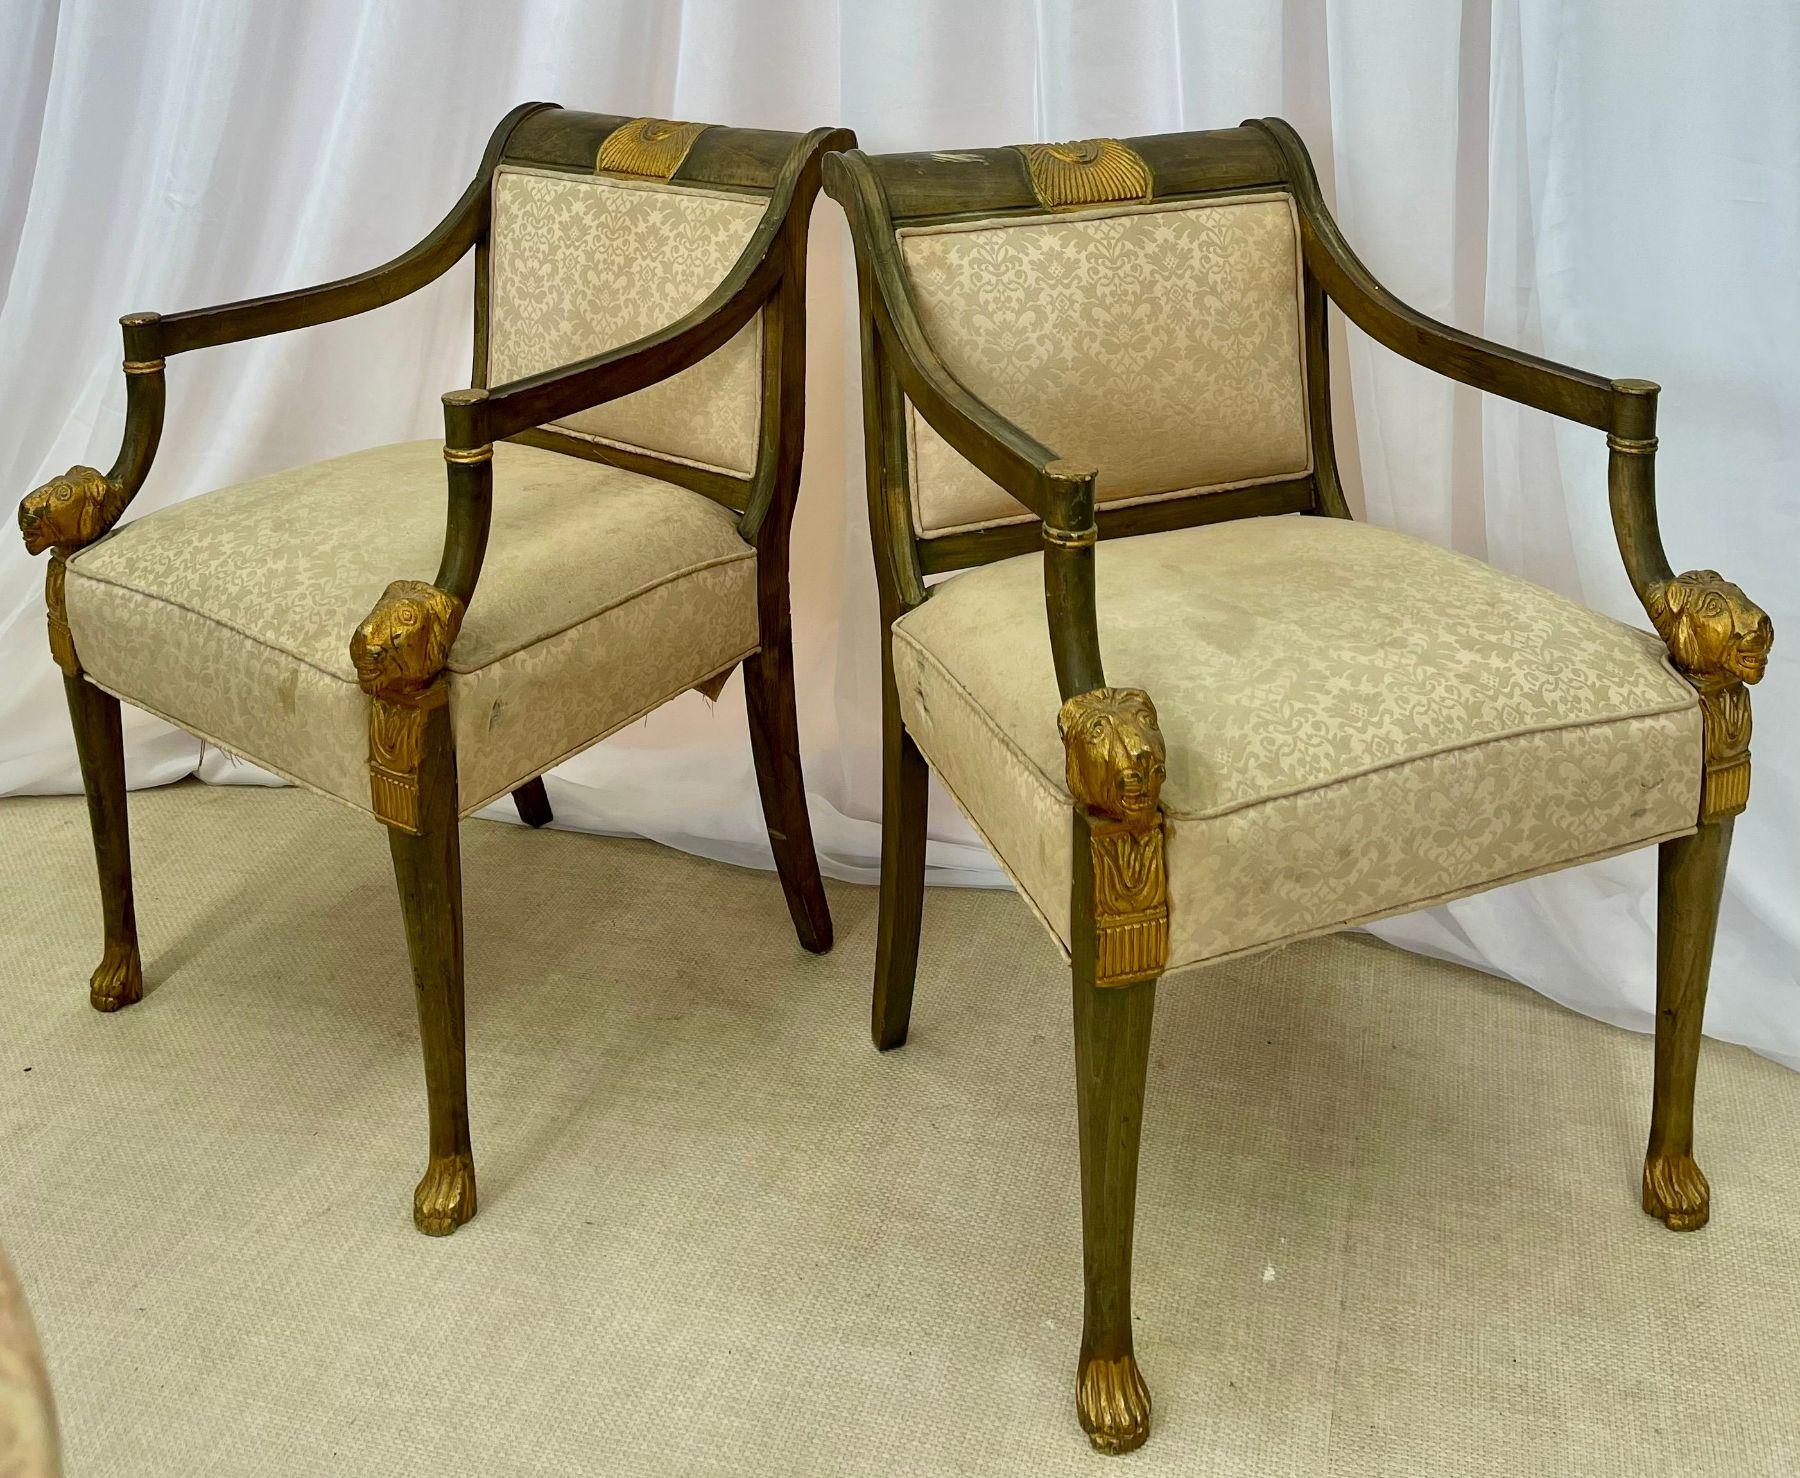 Wood 19th Century Swedish Neoclassical Arm Chairs, a Pair, Fauteuils, Europe, 19th C.